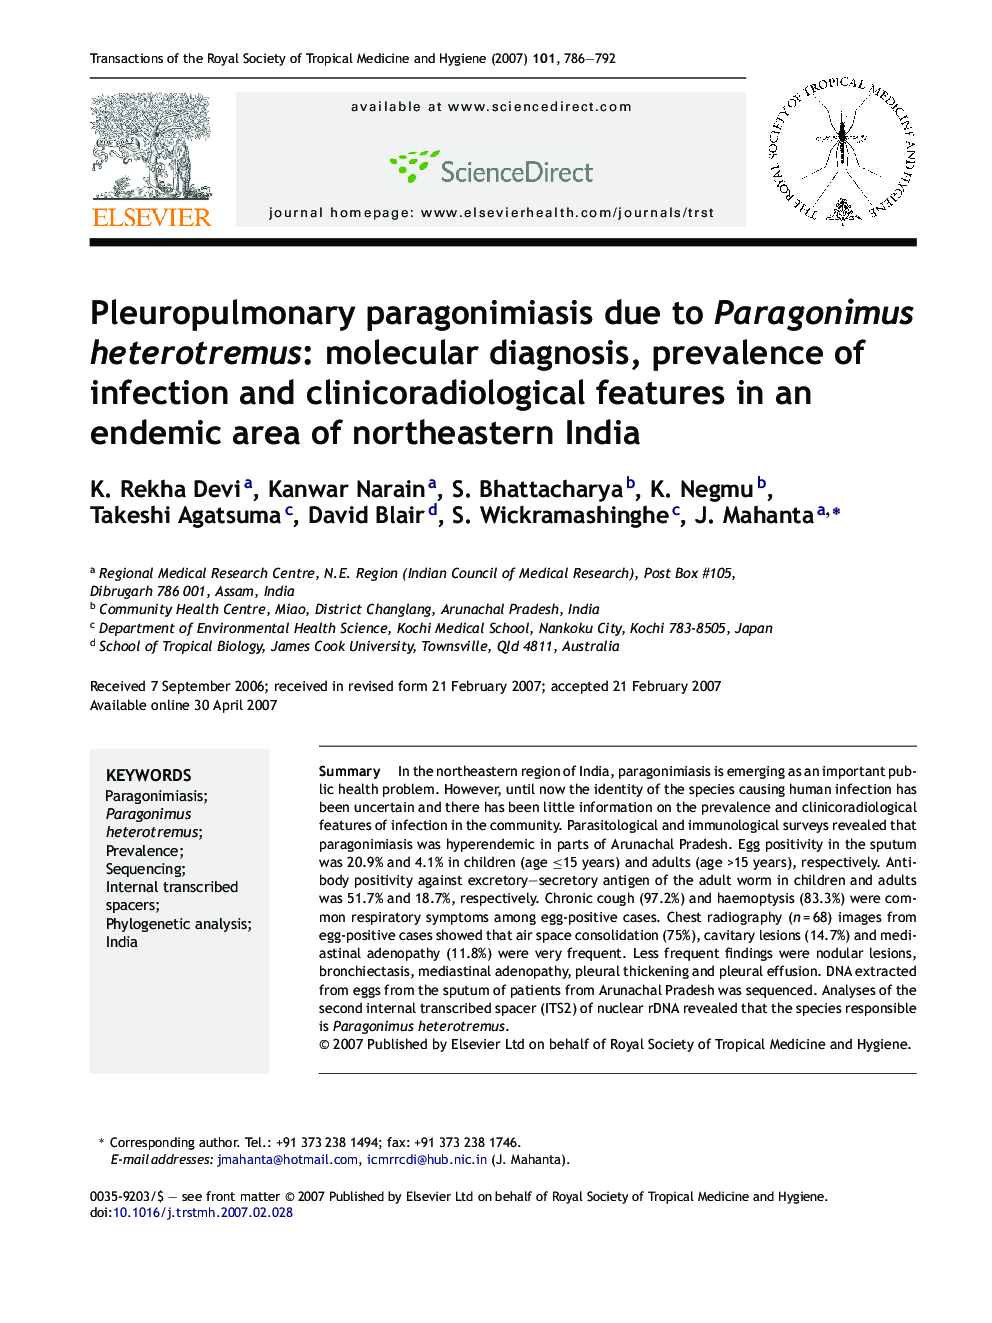 Pleuropulmonary paragonimiasis due to Paragonimus heterotremus: molecular diagnosis, prevalence of infection and clinicoradiological features in an endemic area of northeastern India